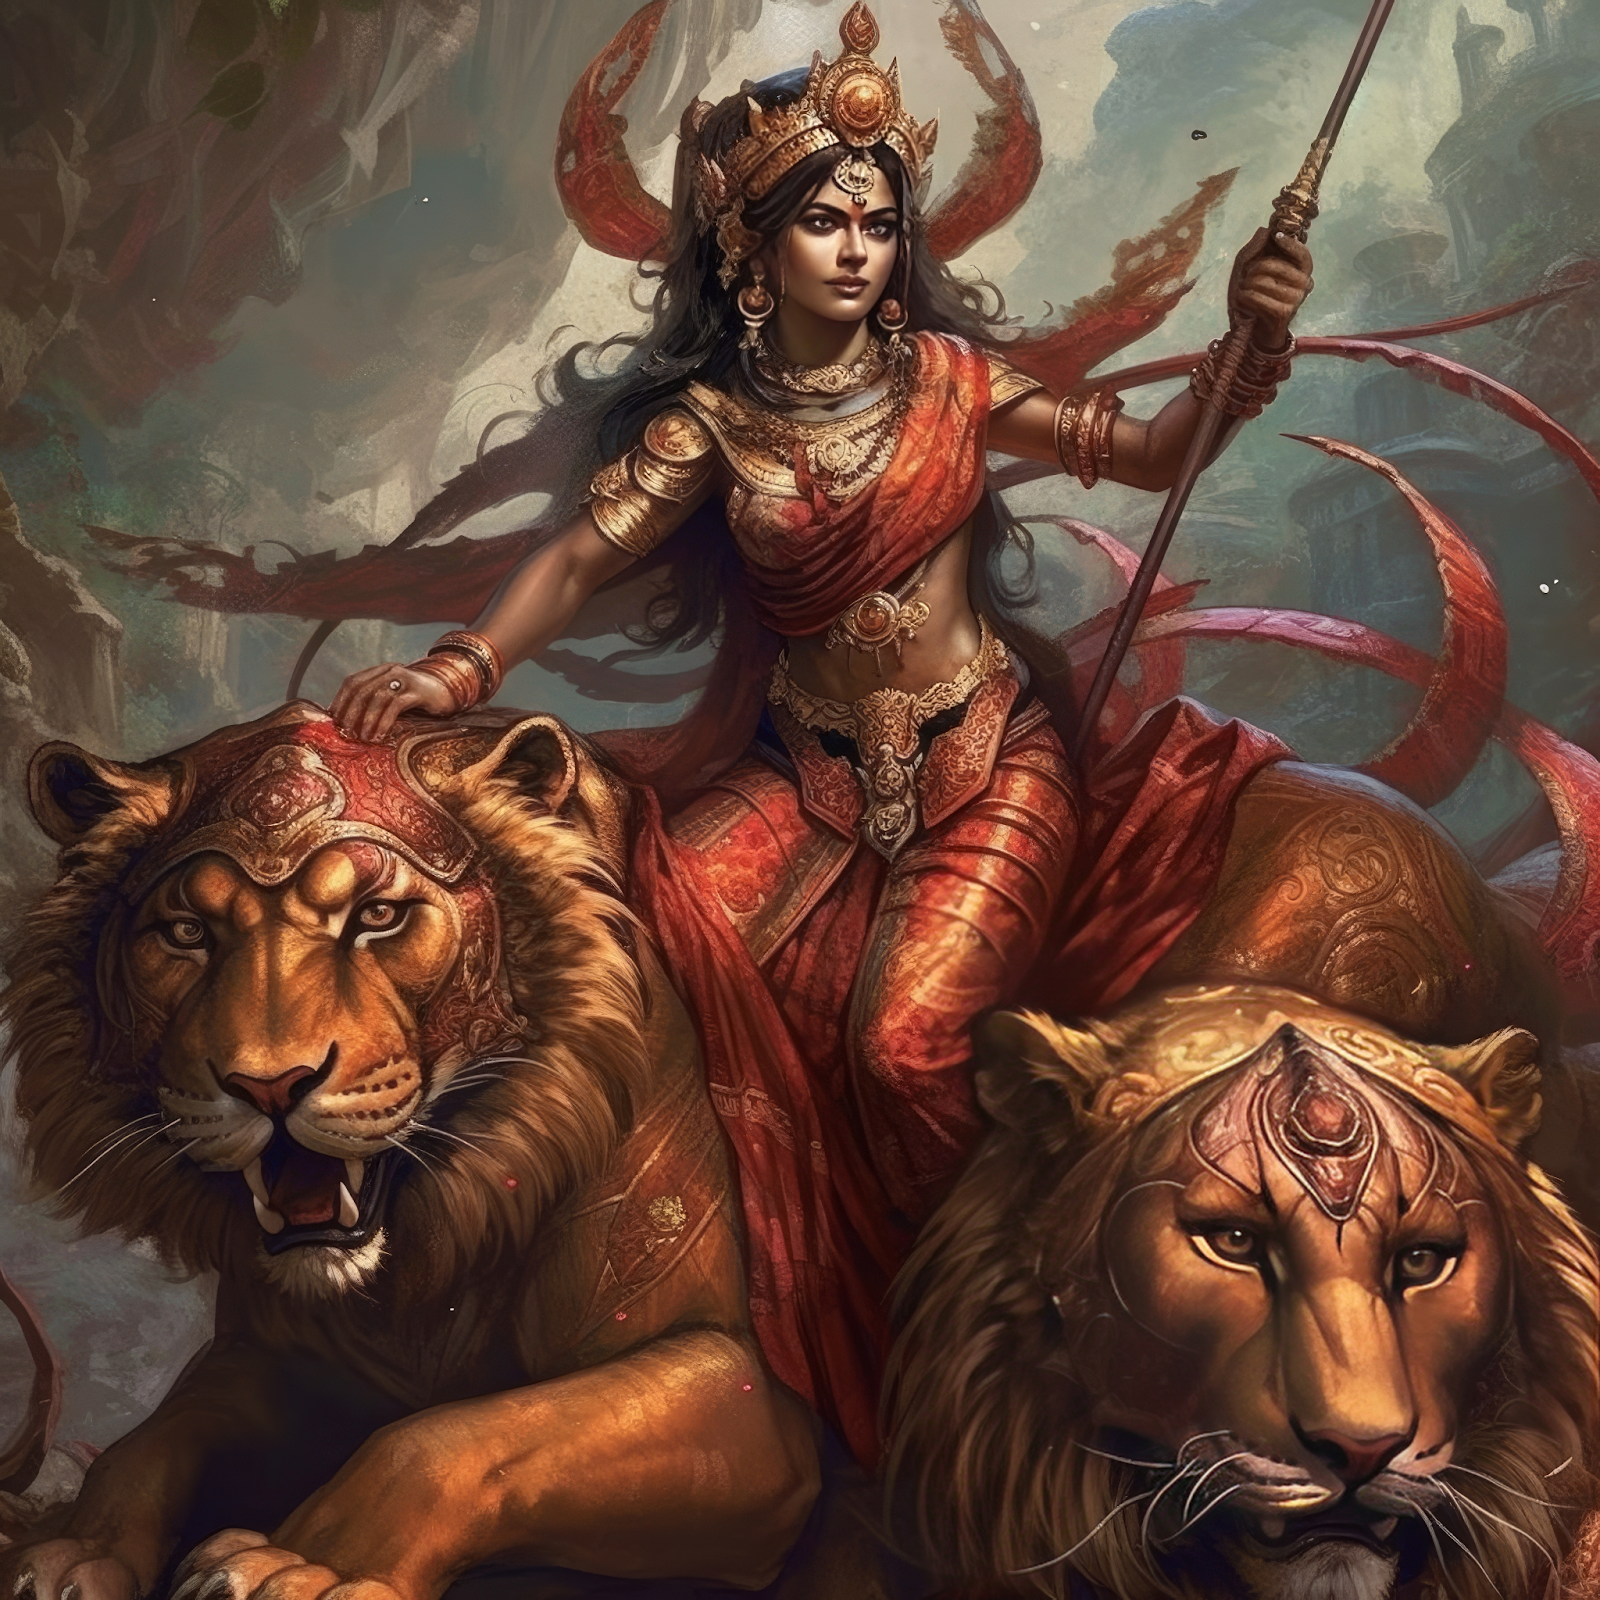 The artwork depicts Durga atop a lion holding golden weapons such as a trident, and wearing golden jewelry including bangles, a headpiece, and heavy gold necklaces.